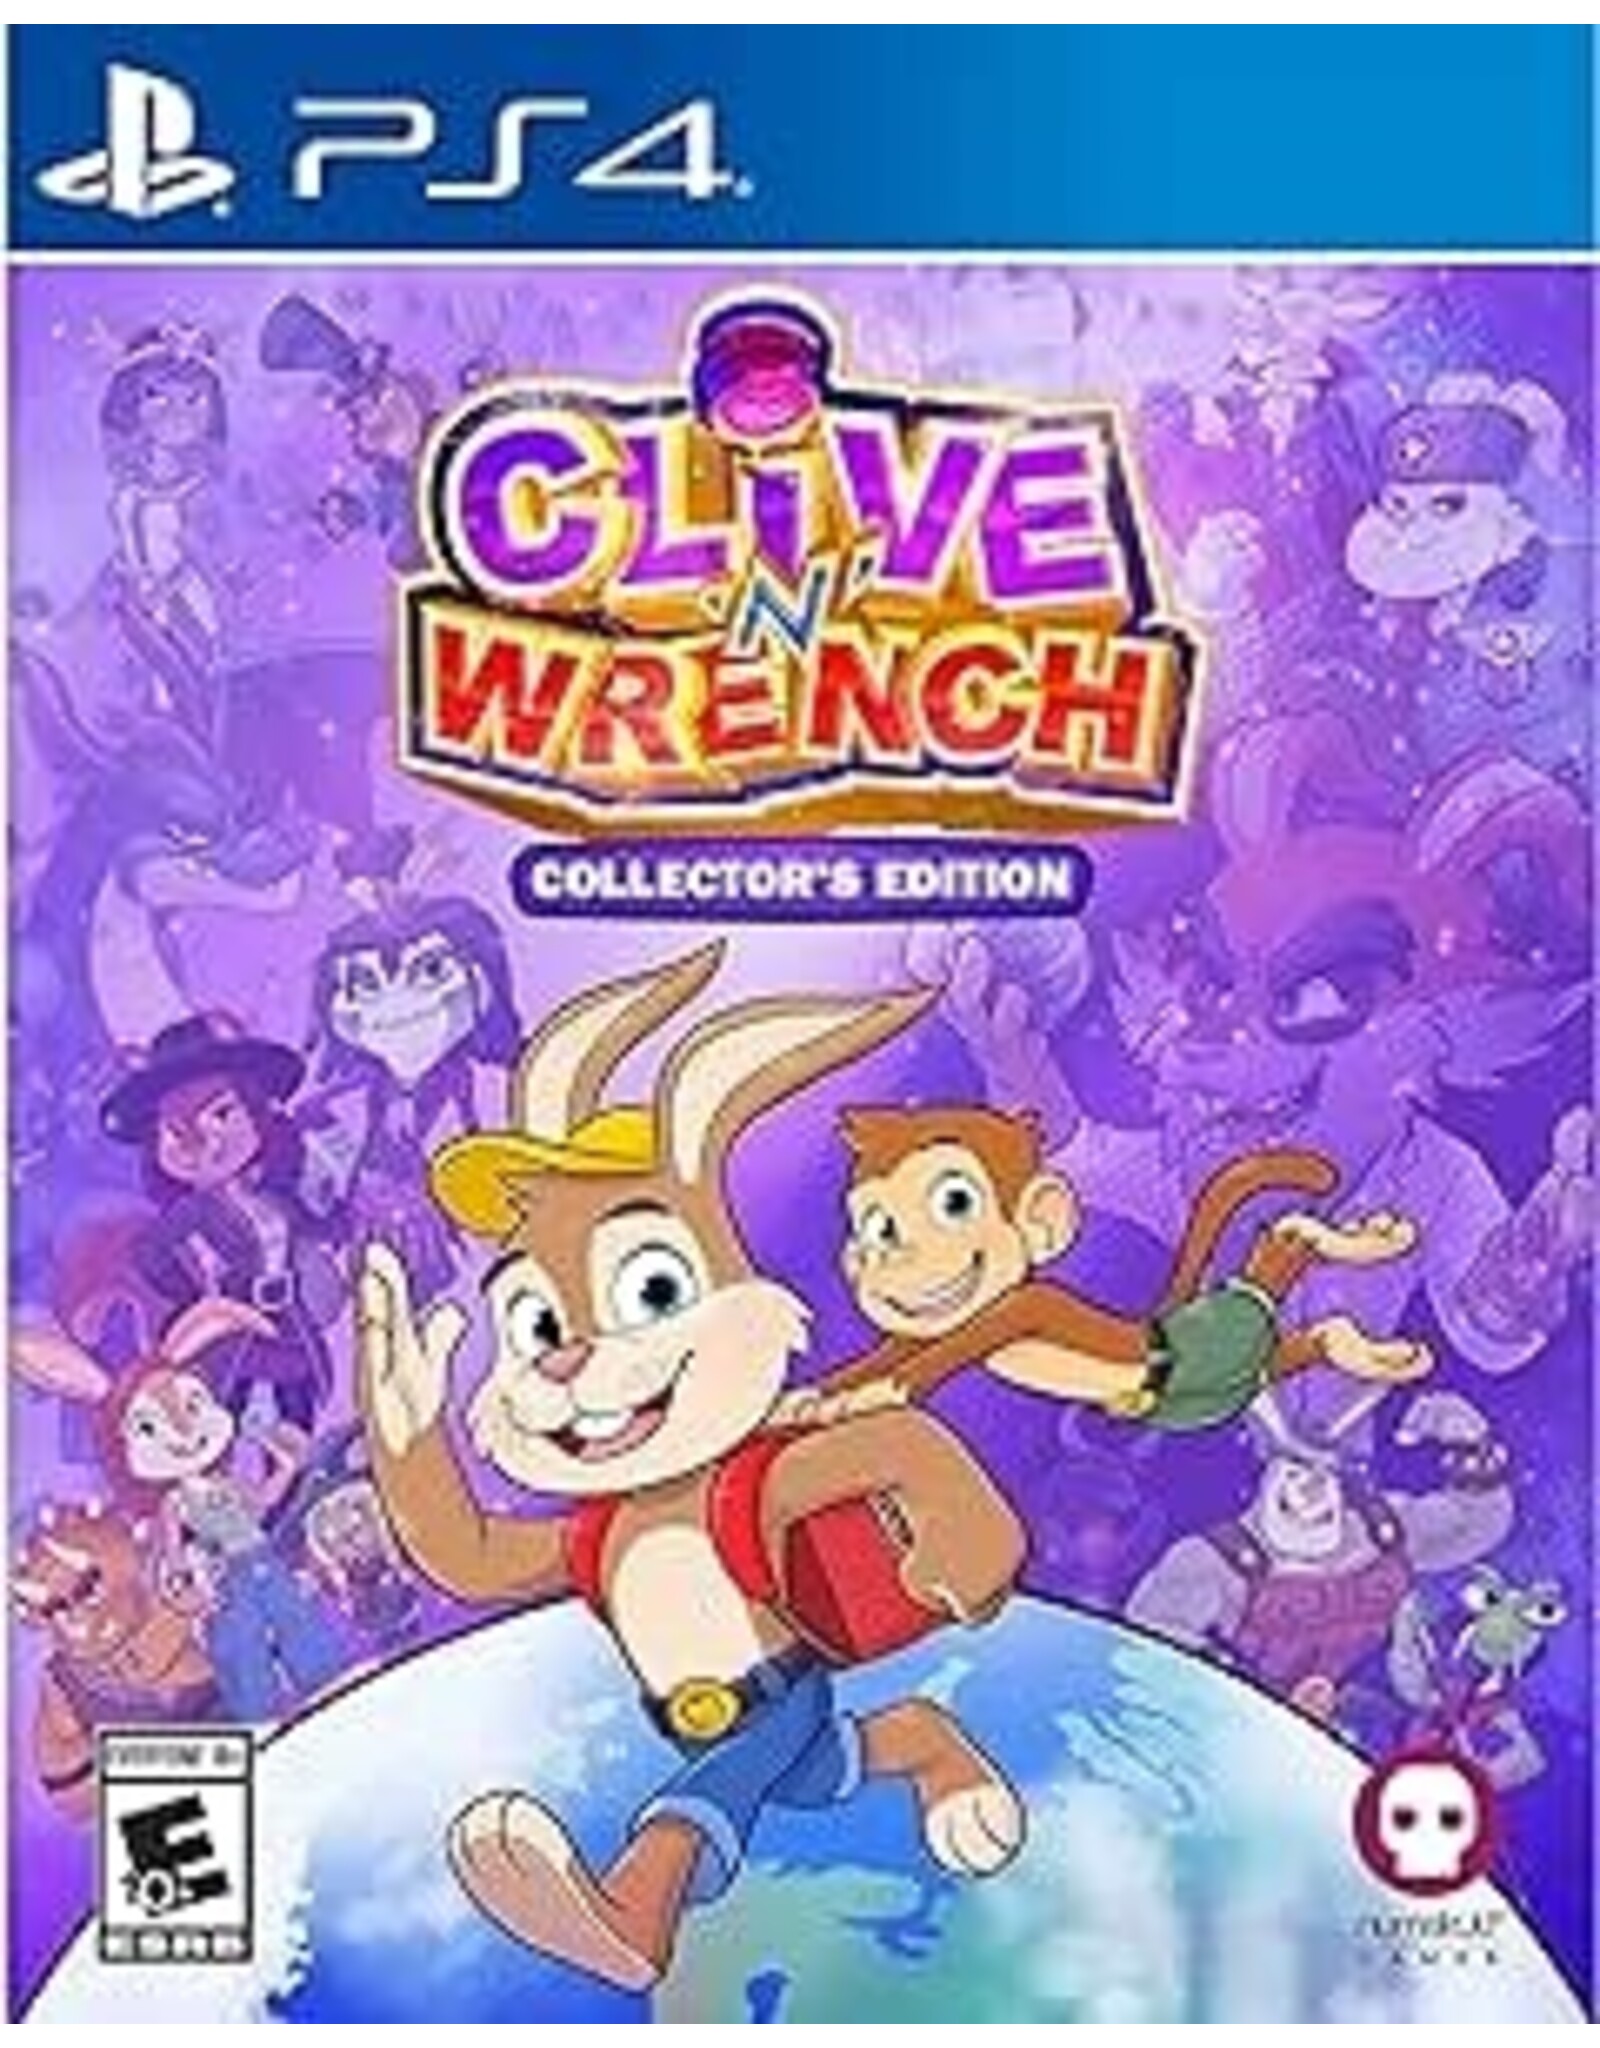 Playstation 4 Clive N' Wrench Collector's Edition (Used, Cosmetic Damage)